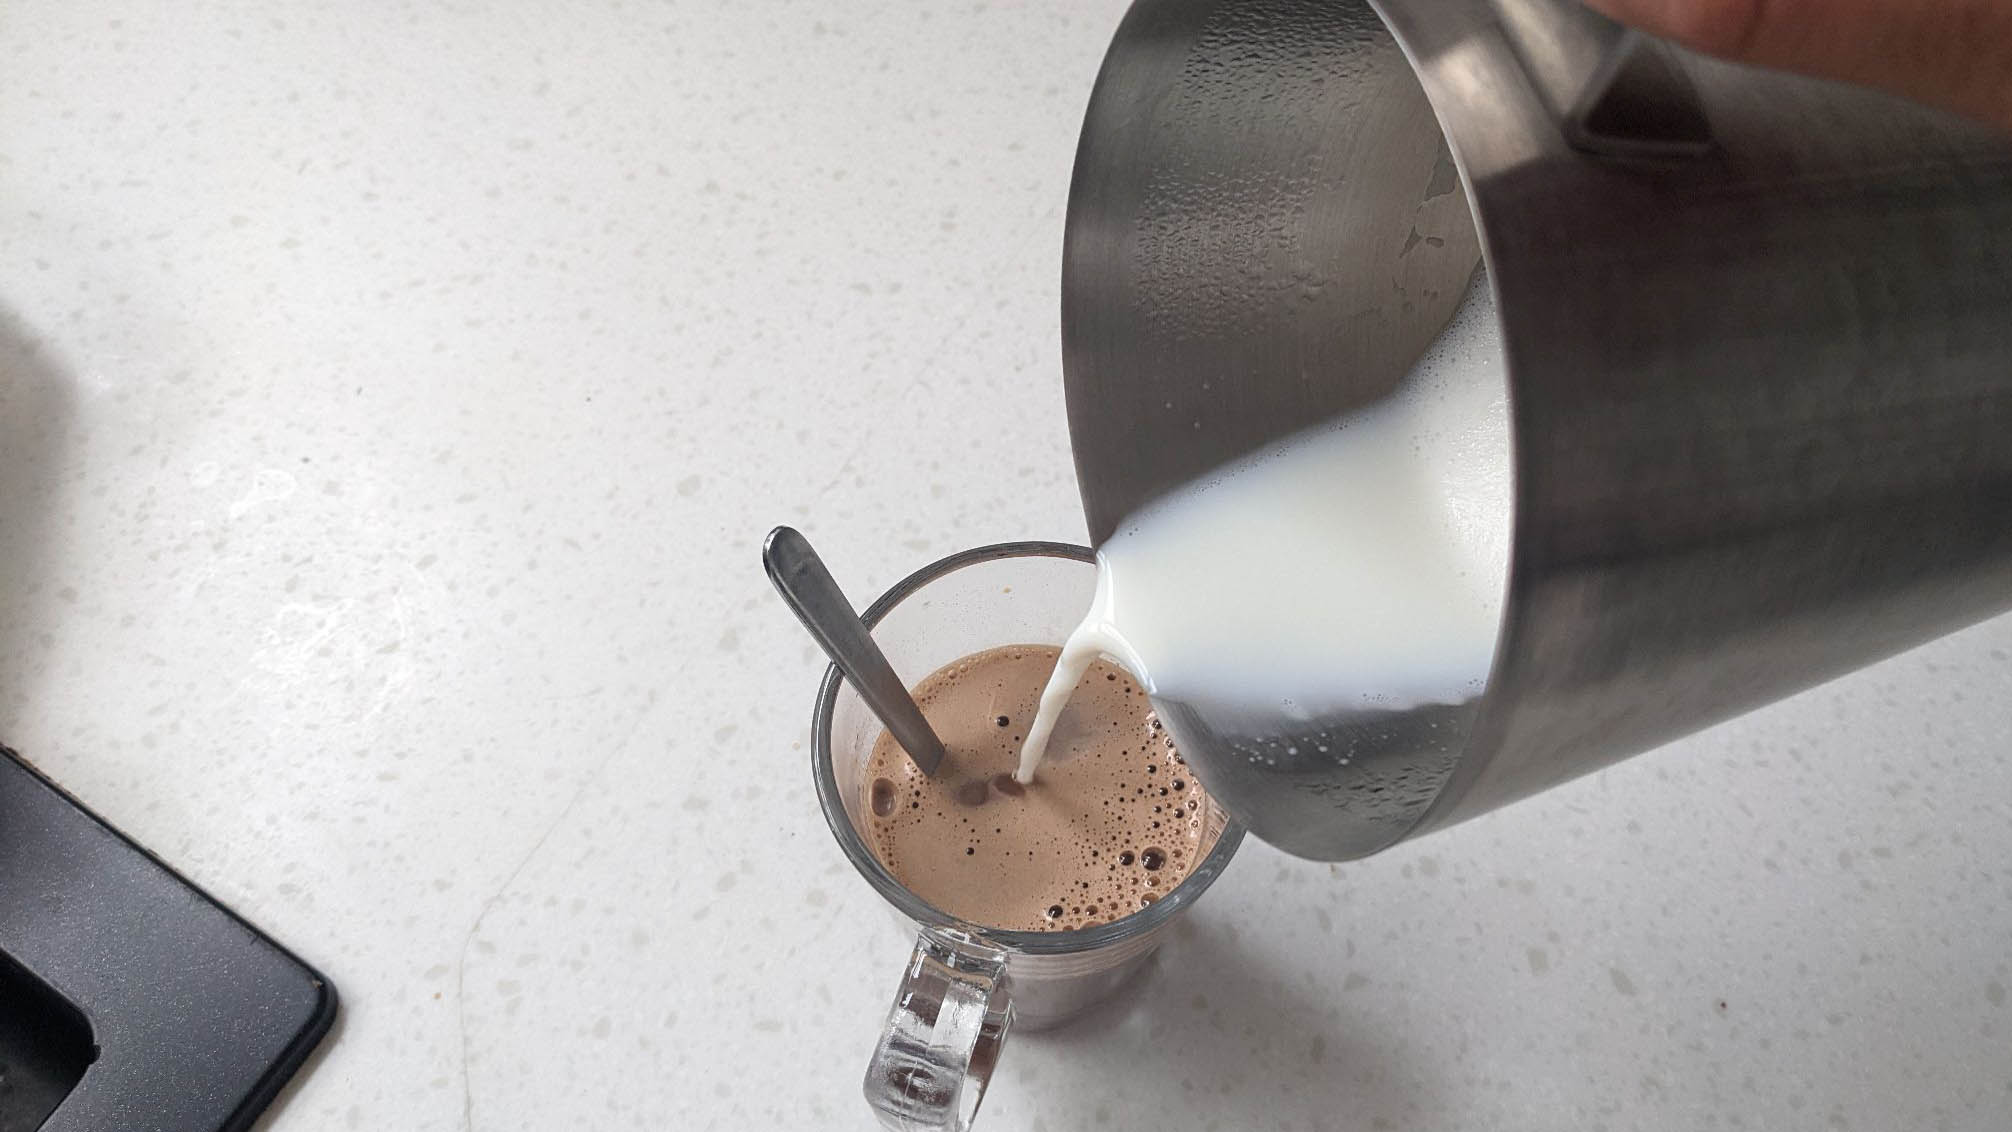 Pouring milk into coffee